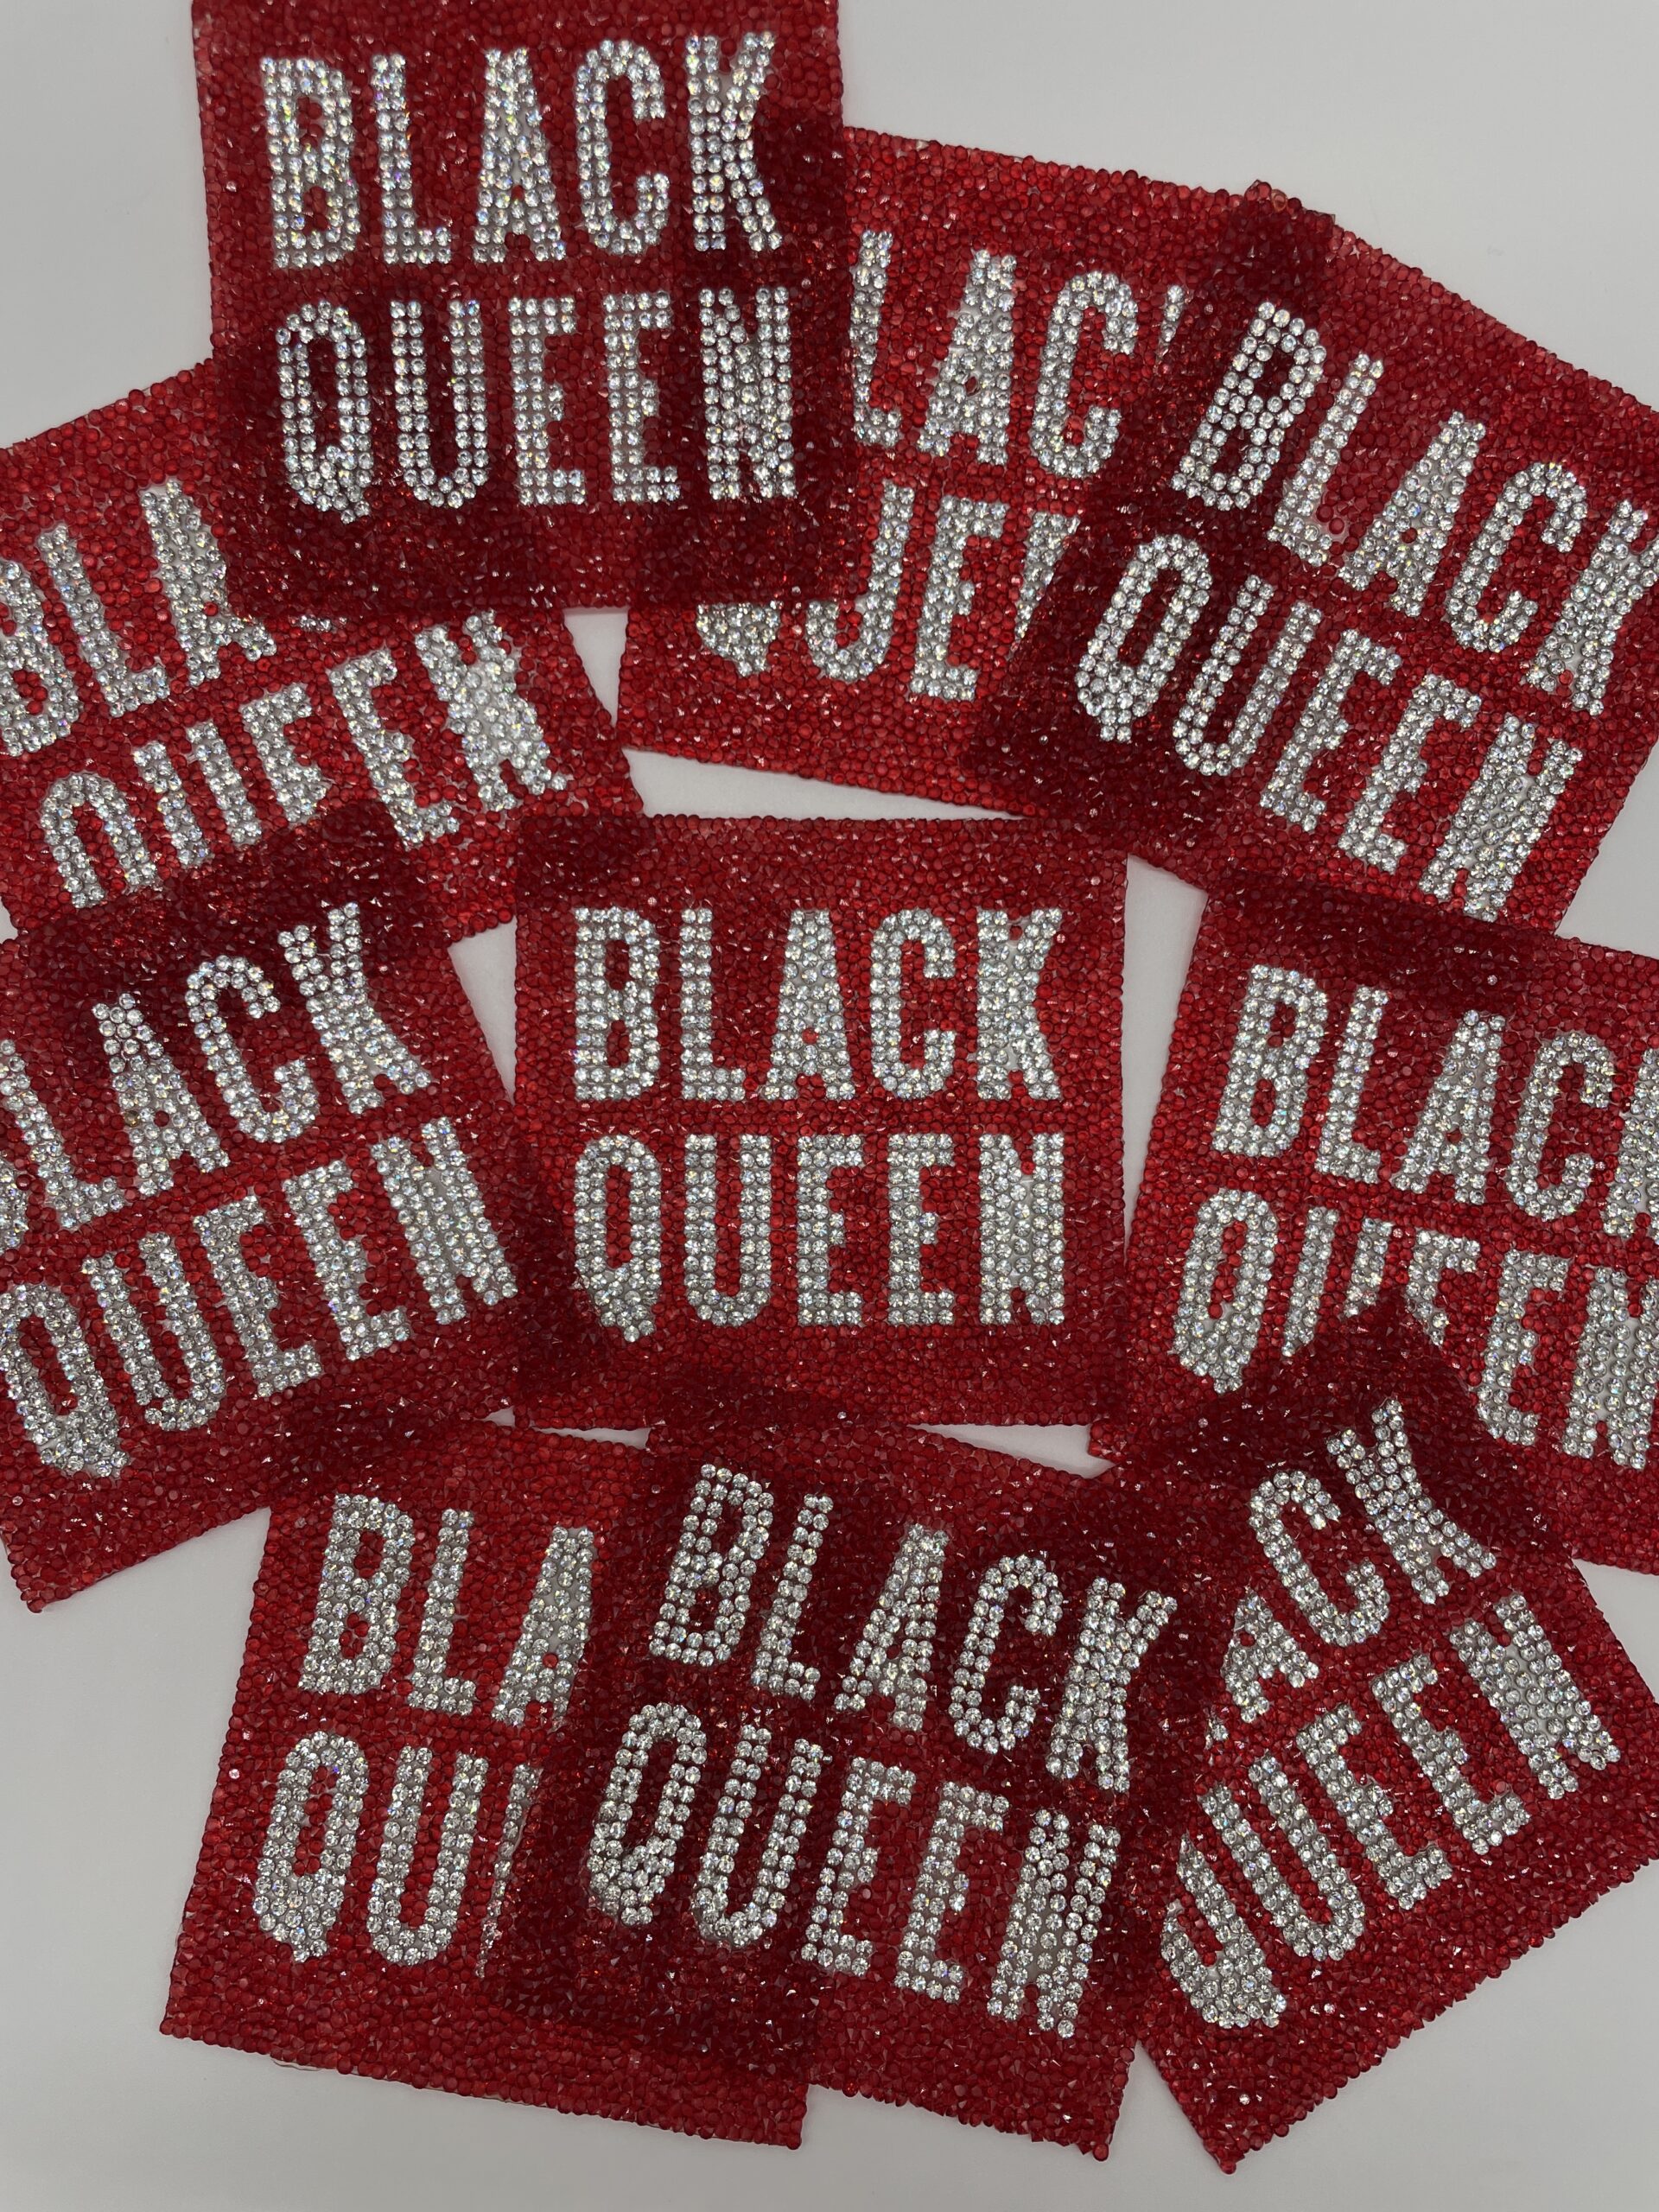 Prideful Patchez, Black Barbie, Iron/sew on Patch, Cool Patches